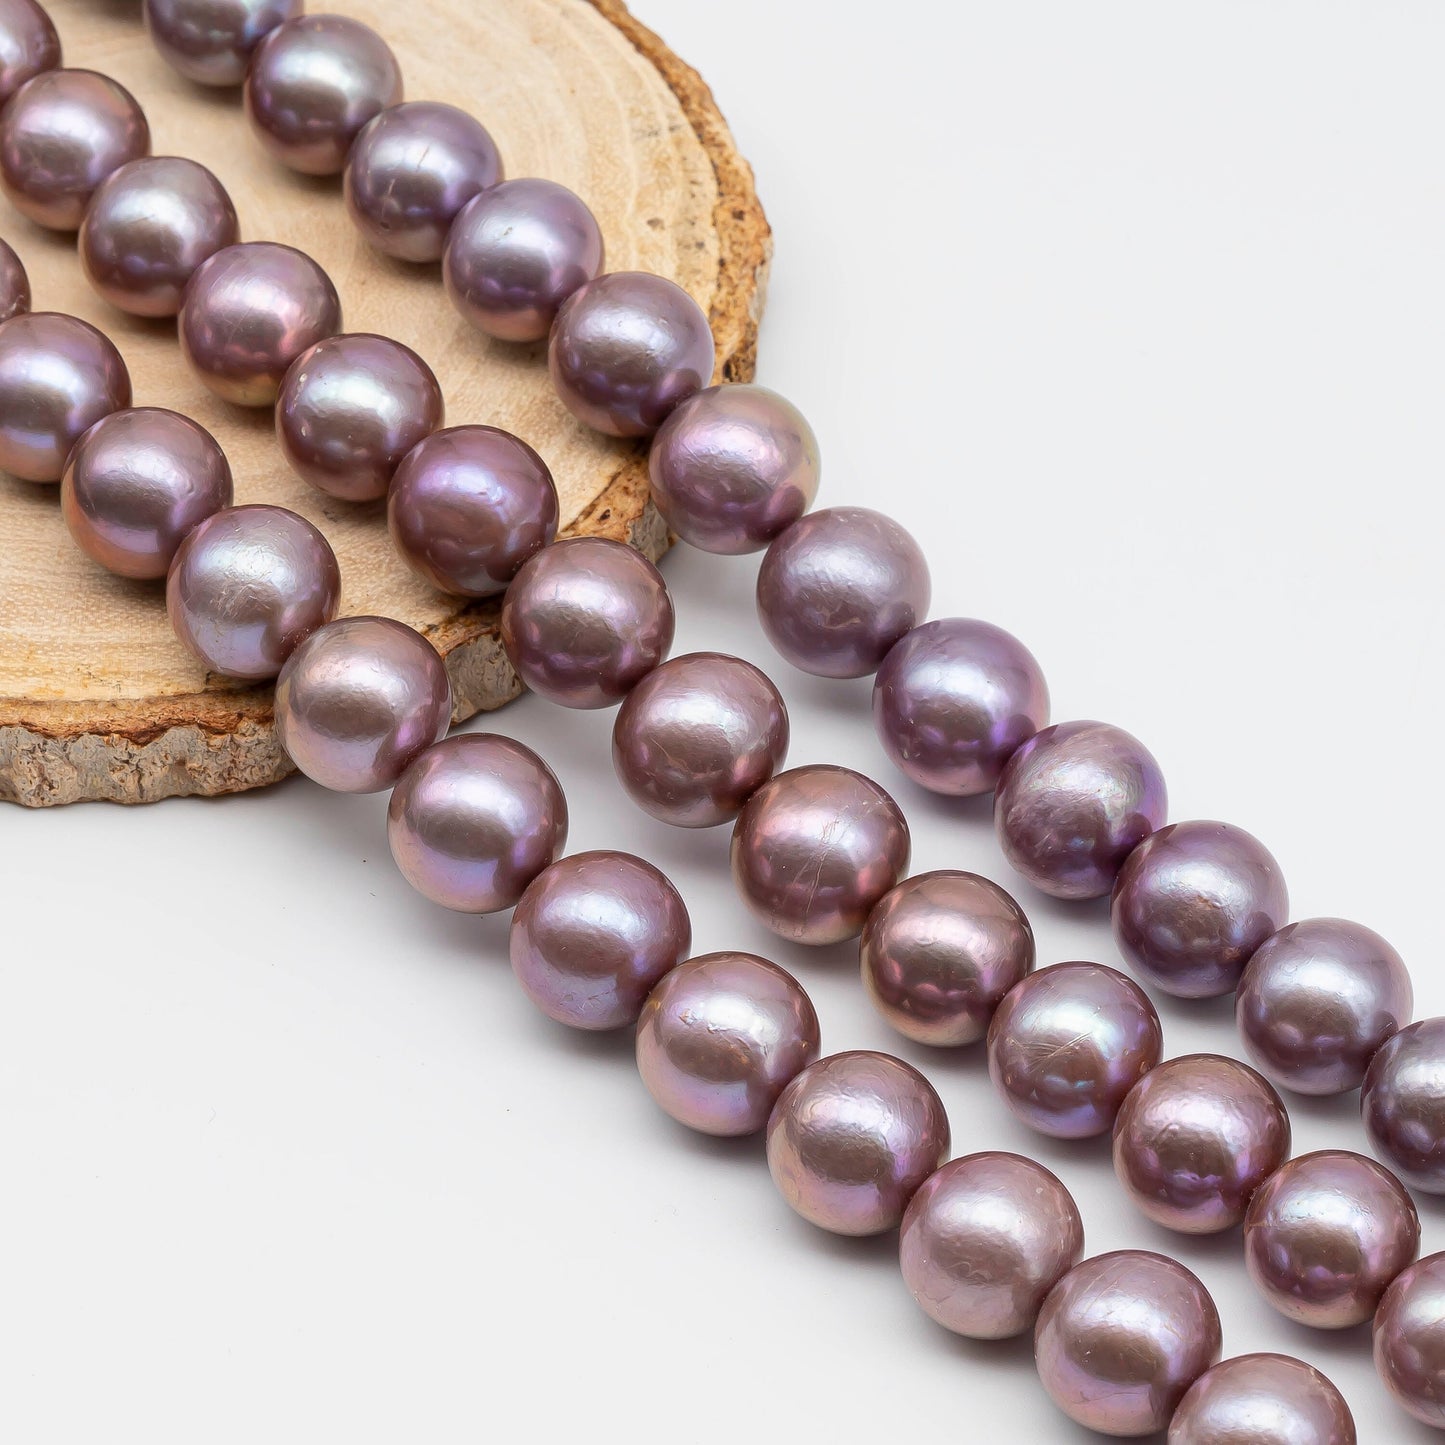 12-14mm Edison Pearl Round Natural Lavender or Metallic Color, Large Size Freshwater Pearl with Lusters and Blemishes, SKU#1228EP